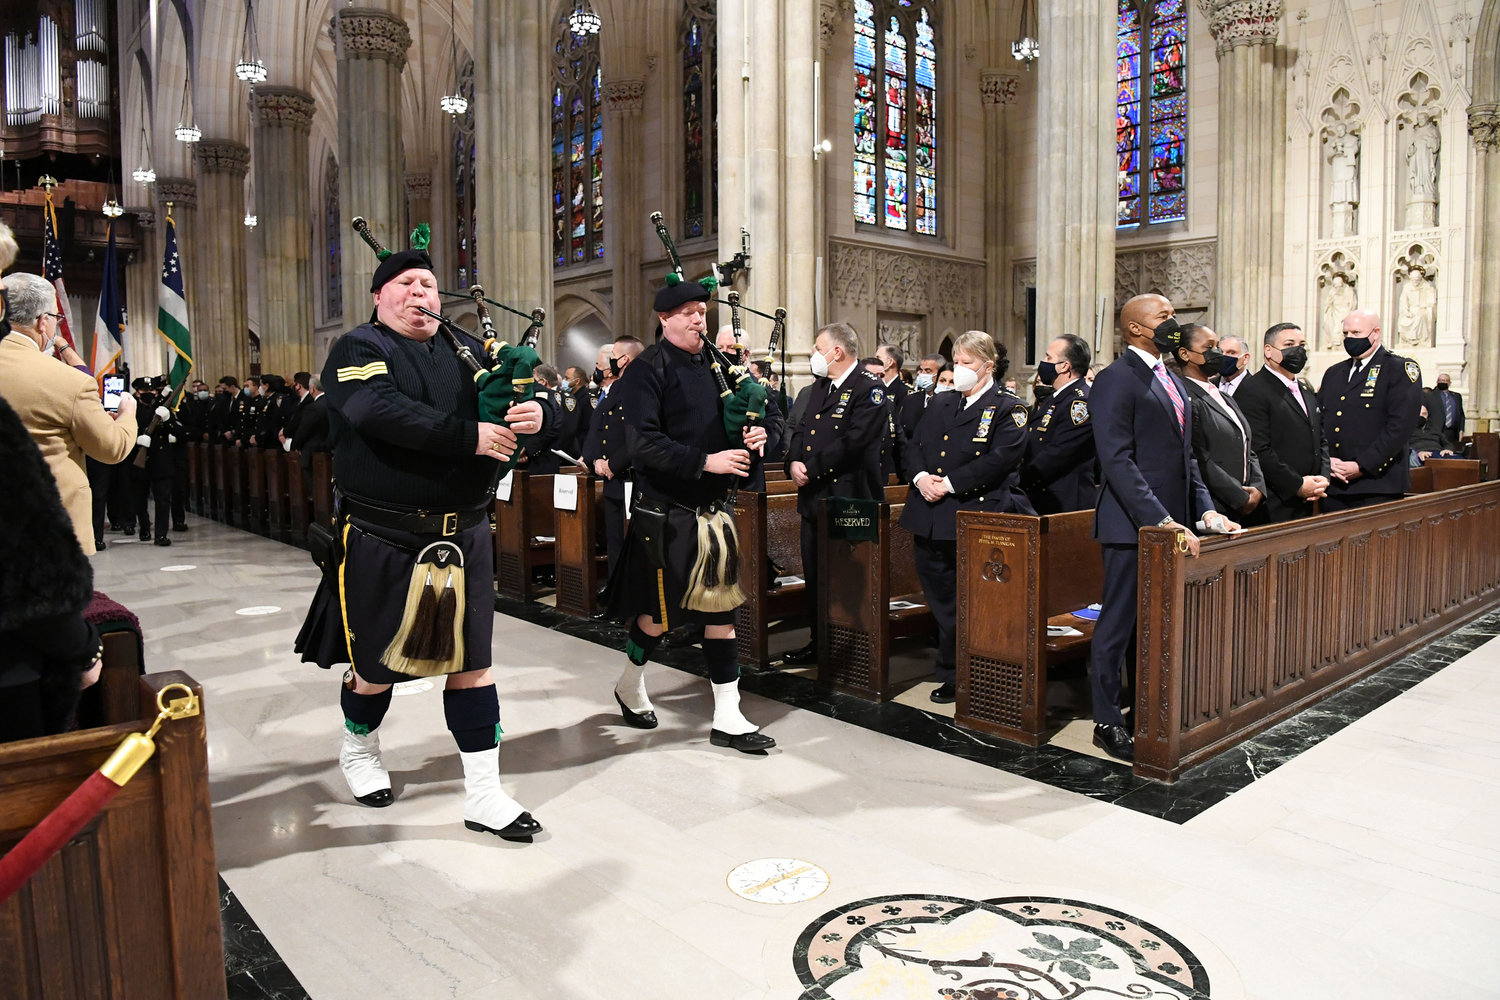 NYPD bagpipers lead the procession. In front pew at right are, from left, Mayor Eric Adams; NYPD Commissioner Keechant Sewell; Edward Caban, First Deputy Commissioner, NYPD; and Kenneth Corey, NYPD Chief of Department.